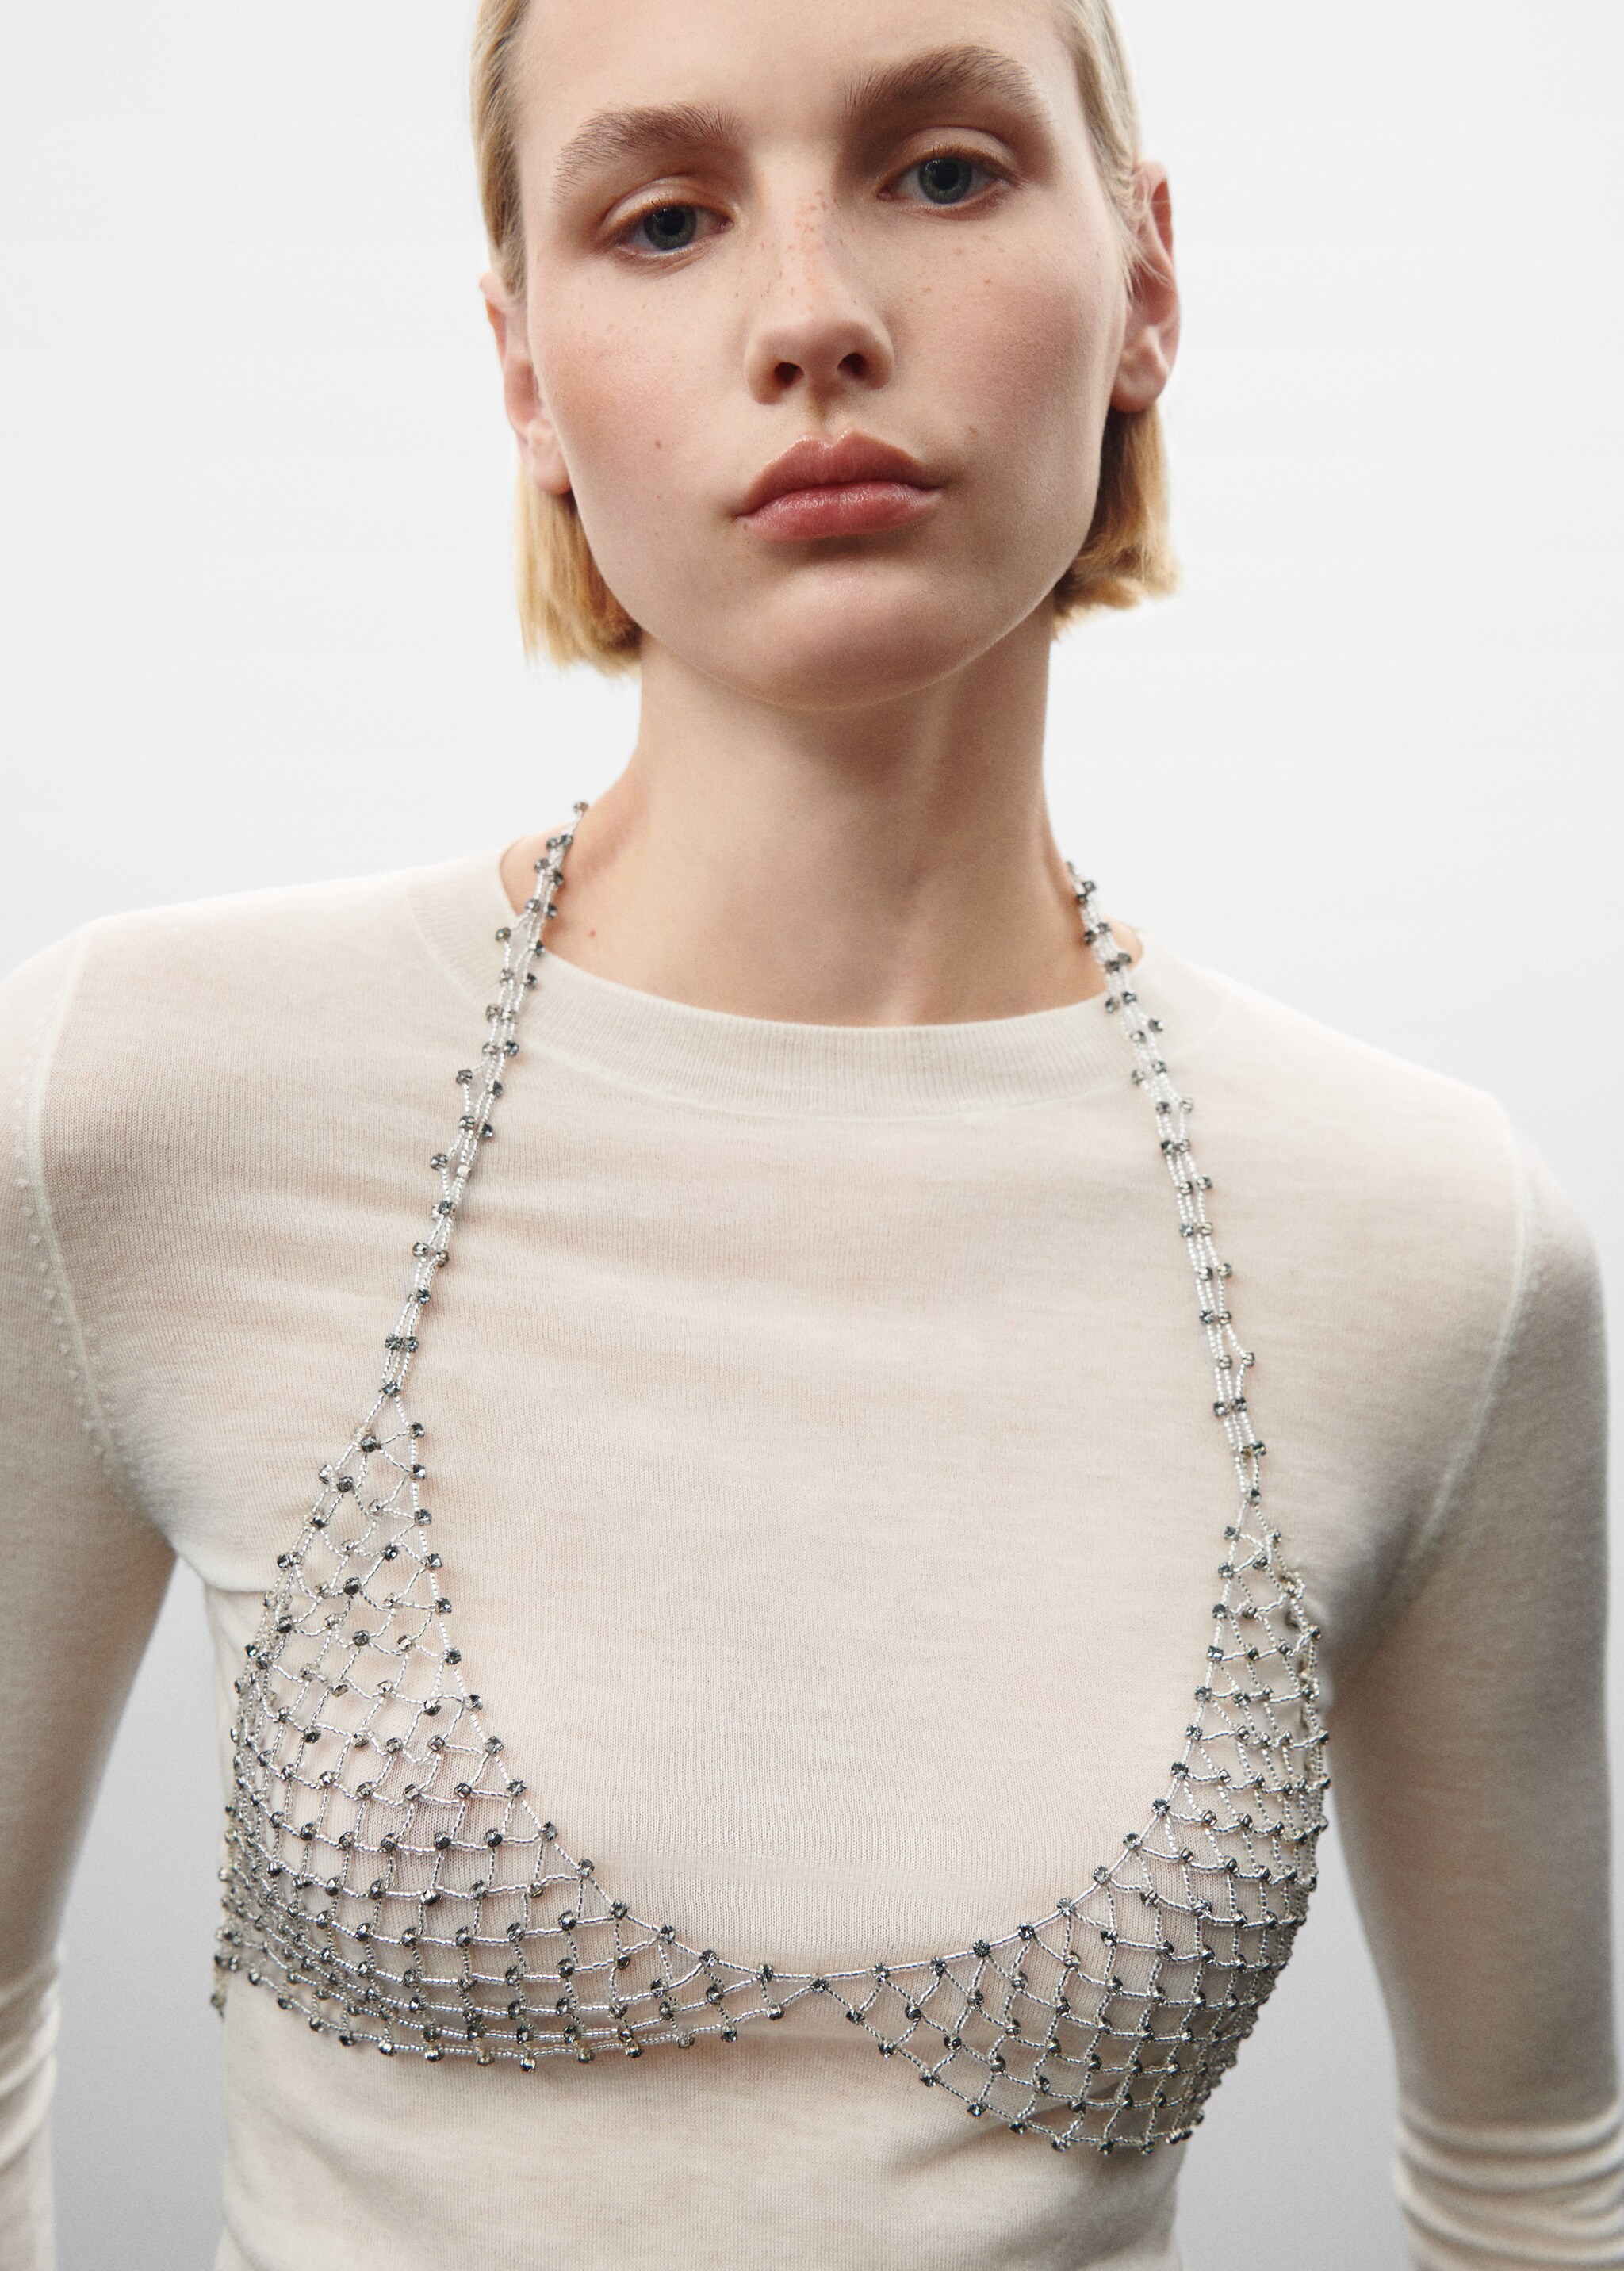 Rhinestone crystal body necklace - Details of the article 9